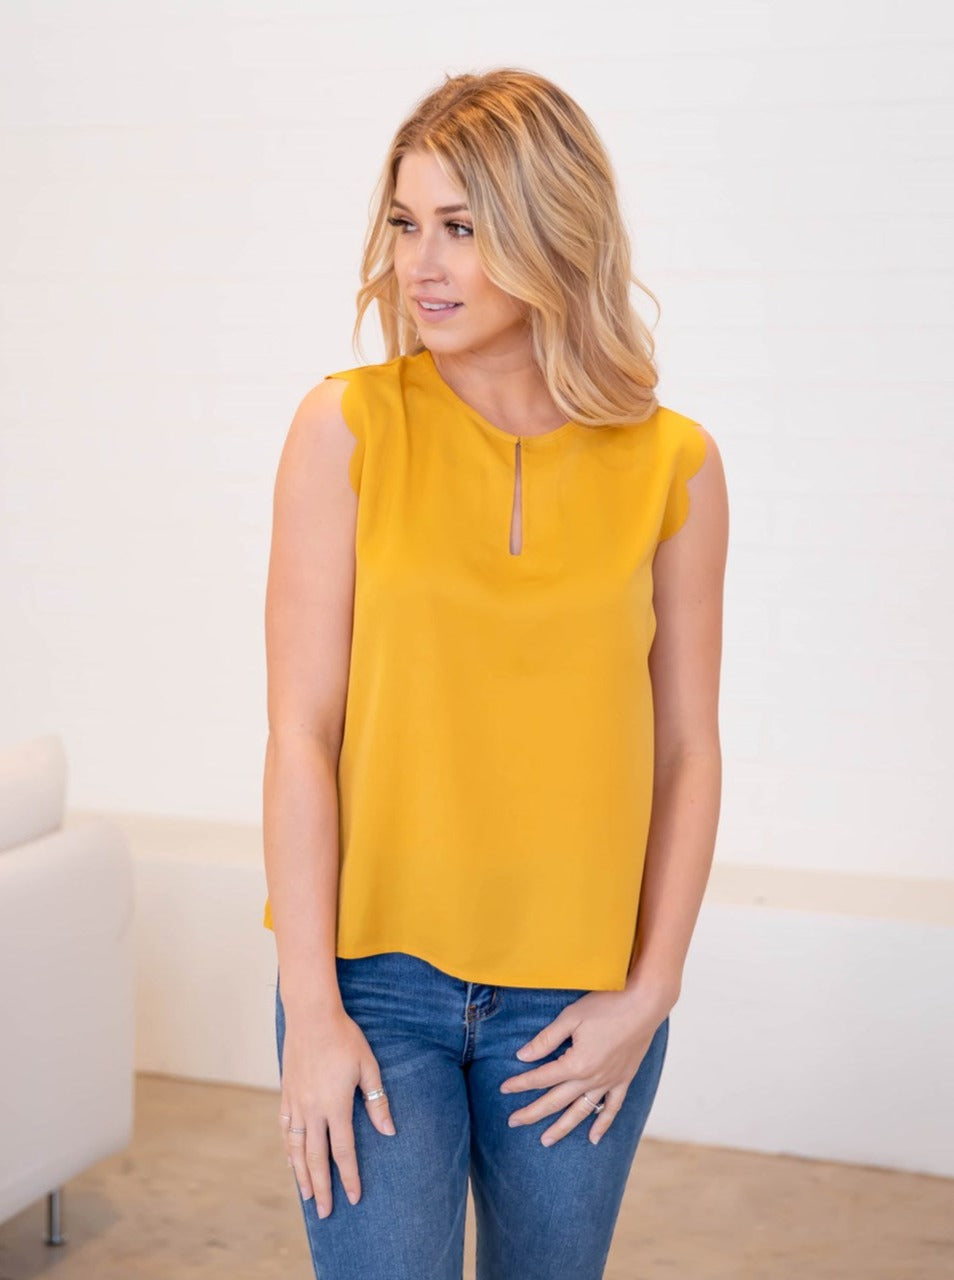 The Emrie Scallop Top